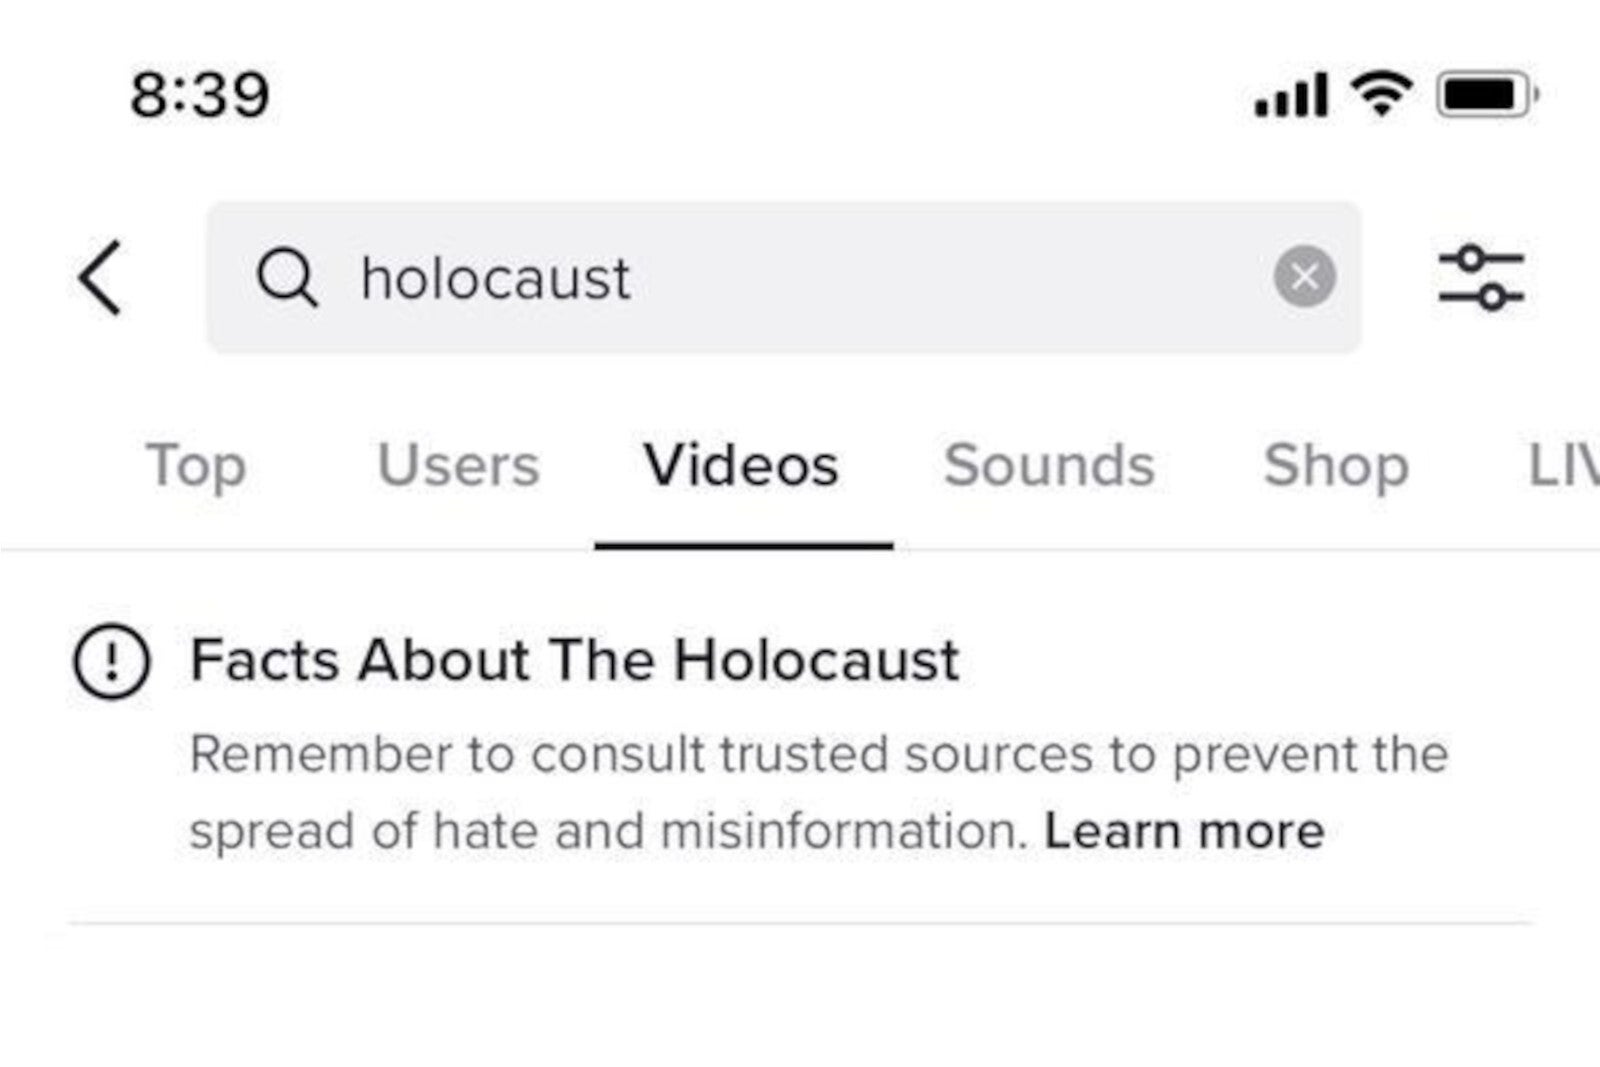 TikTok offers tools to fight antisemitism - TikTok honors Holocaust Remembrance Day